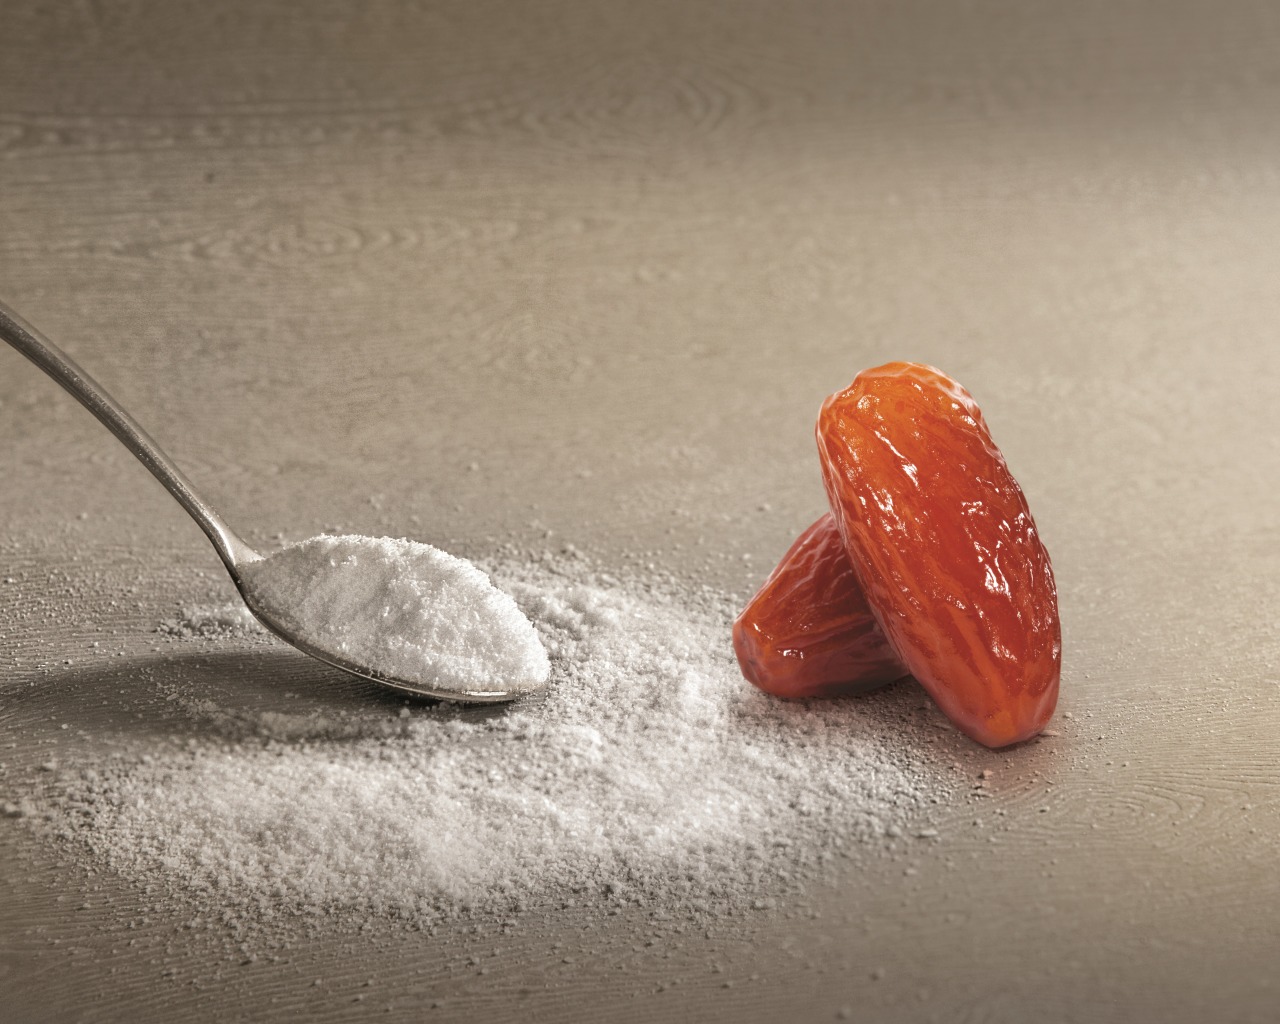 CRYSTAL DATE SUGAR – An exclusive Ingredient for the world food innovation